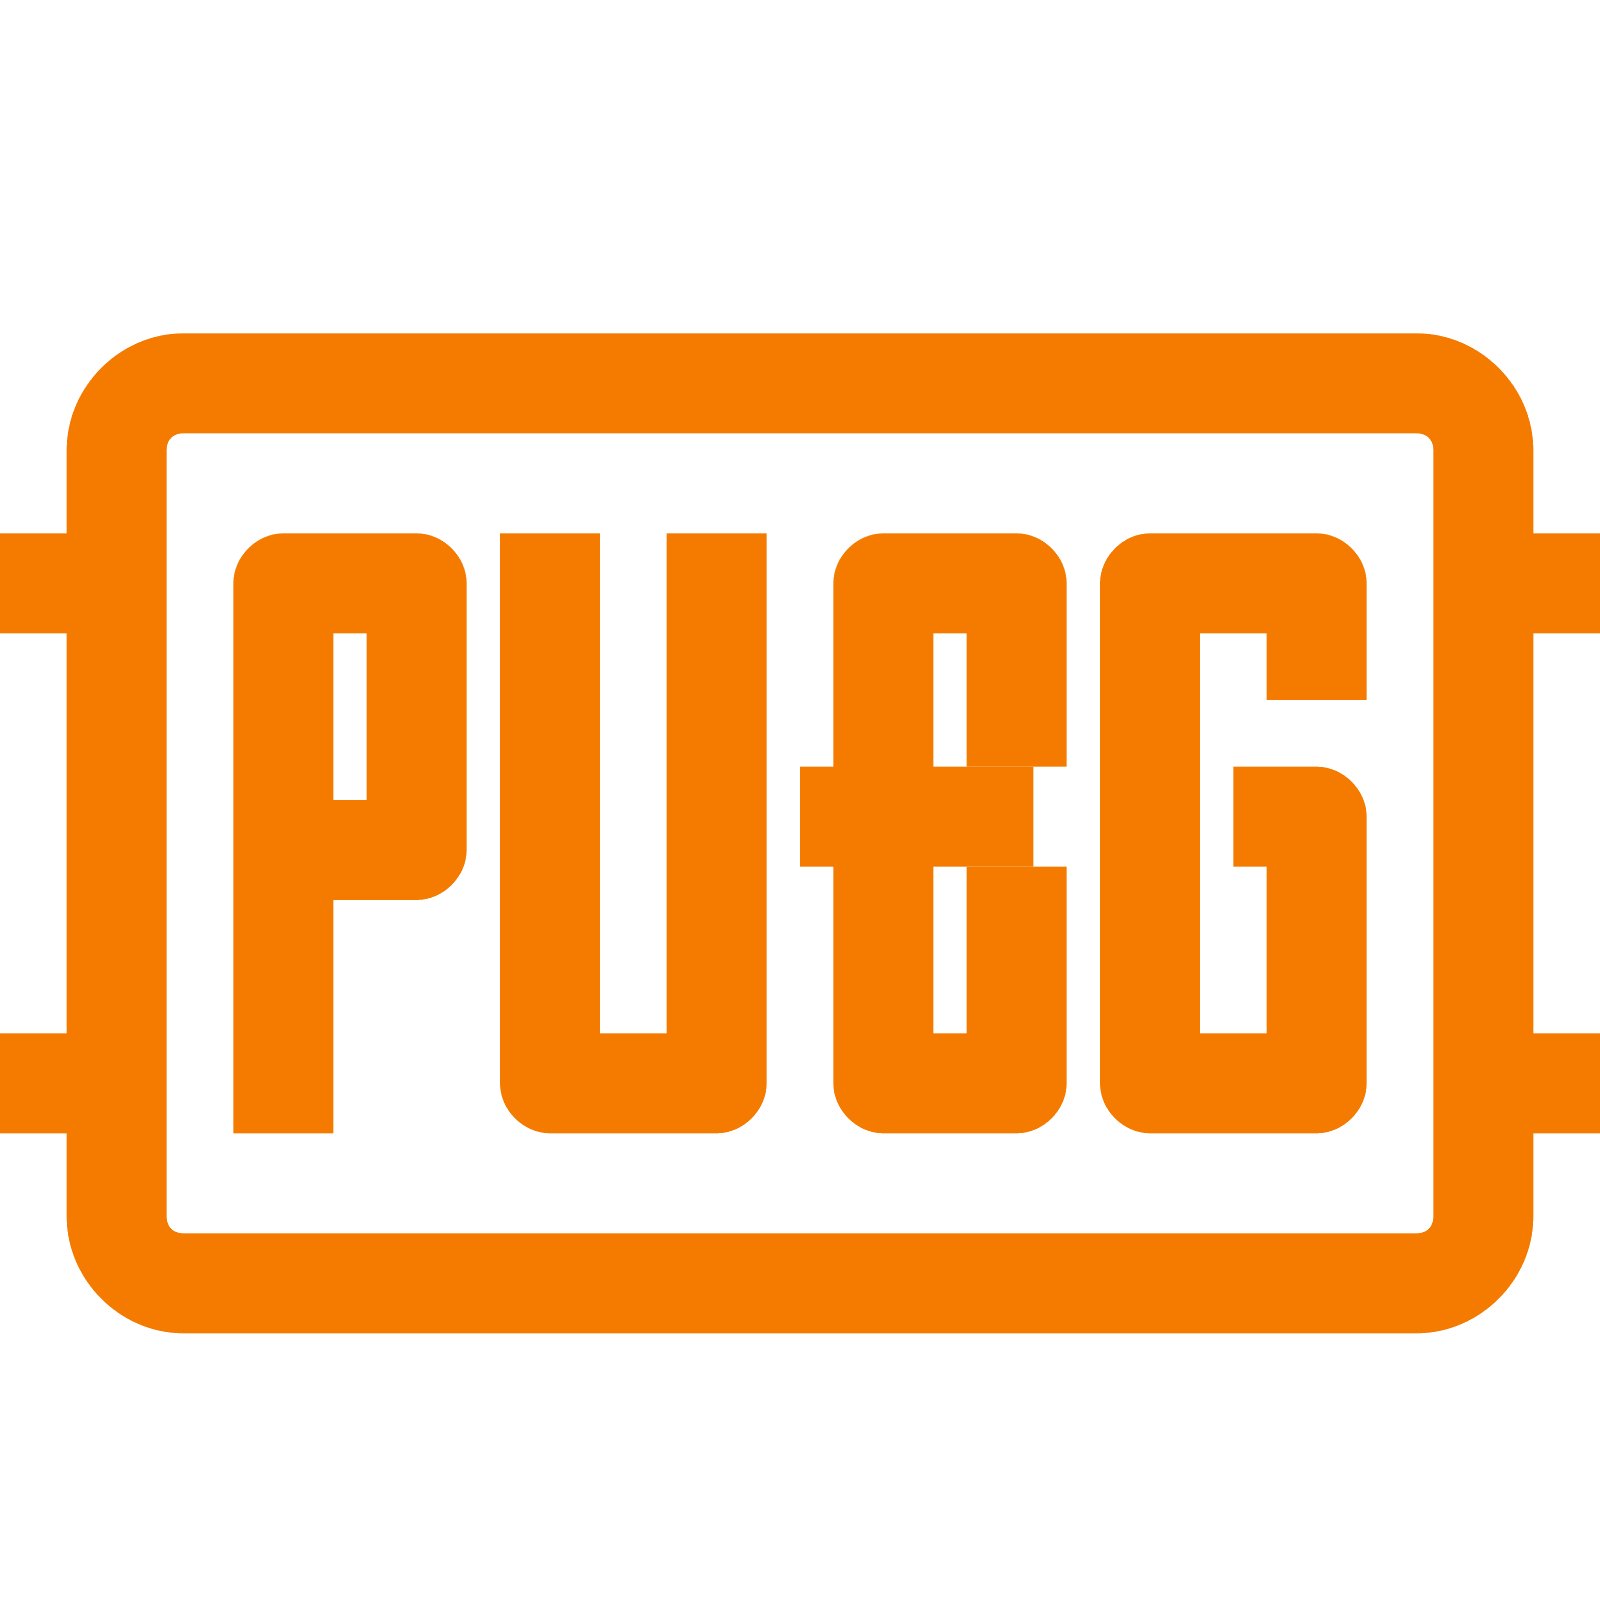 pubglogo icon png